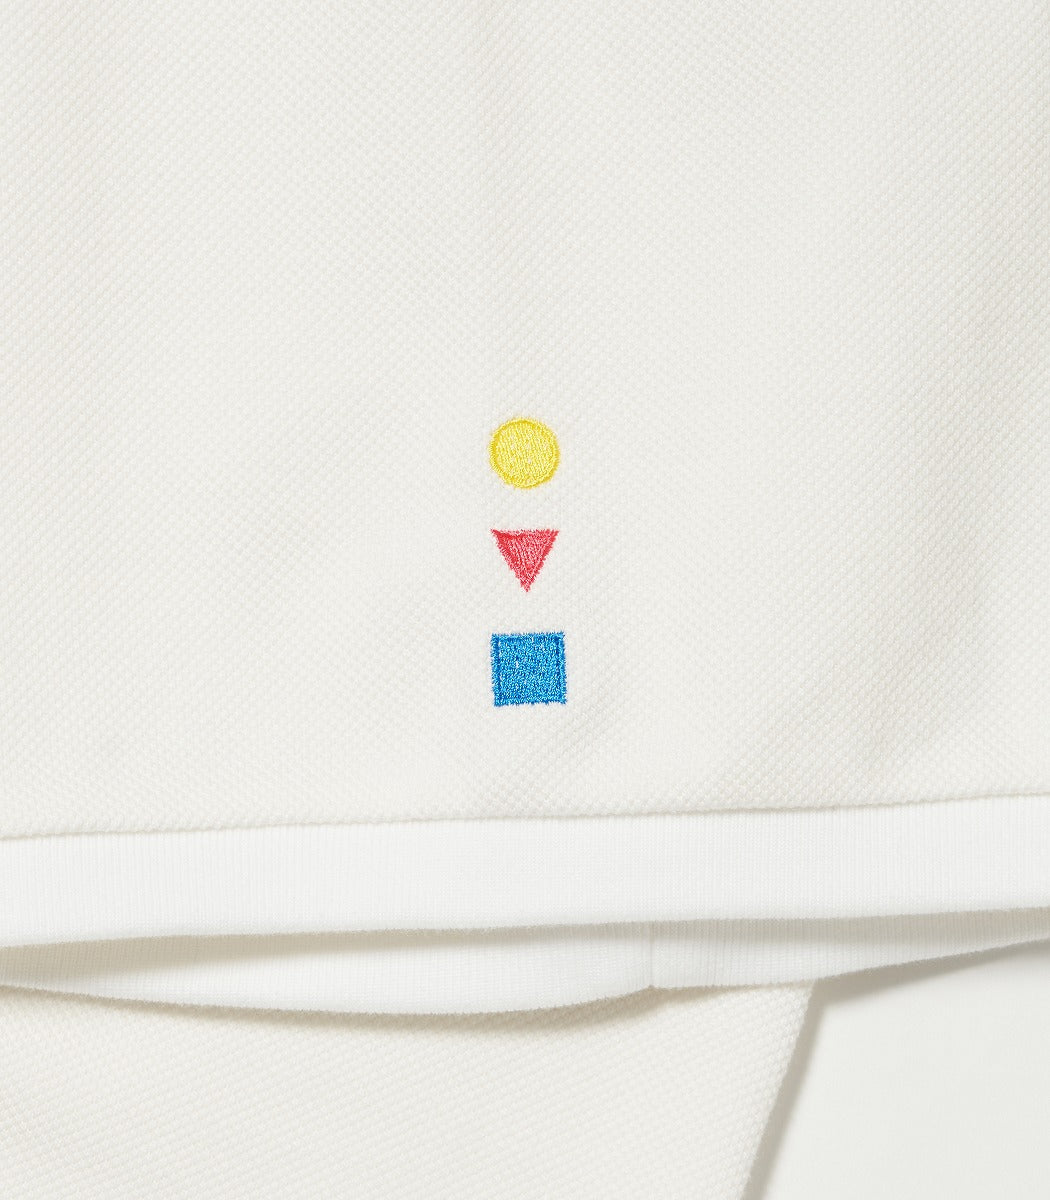 Load image into Gallery viewer, S/S Polo shirt White
